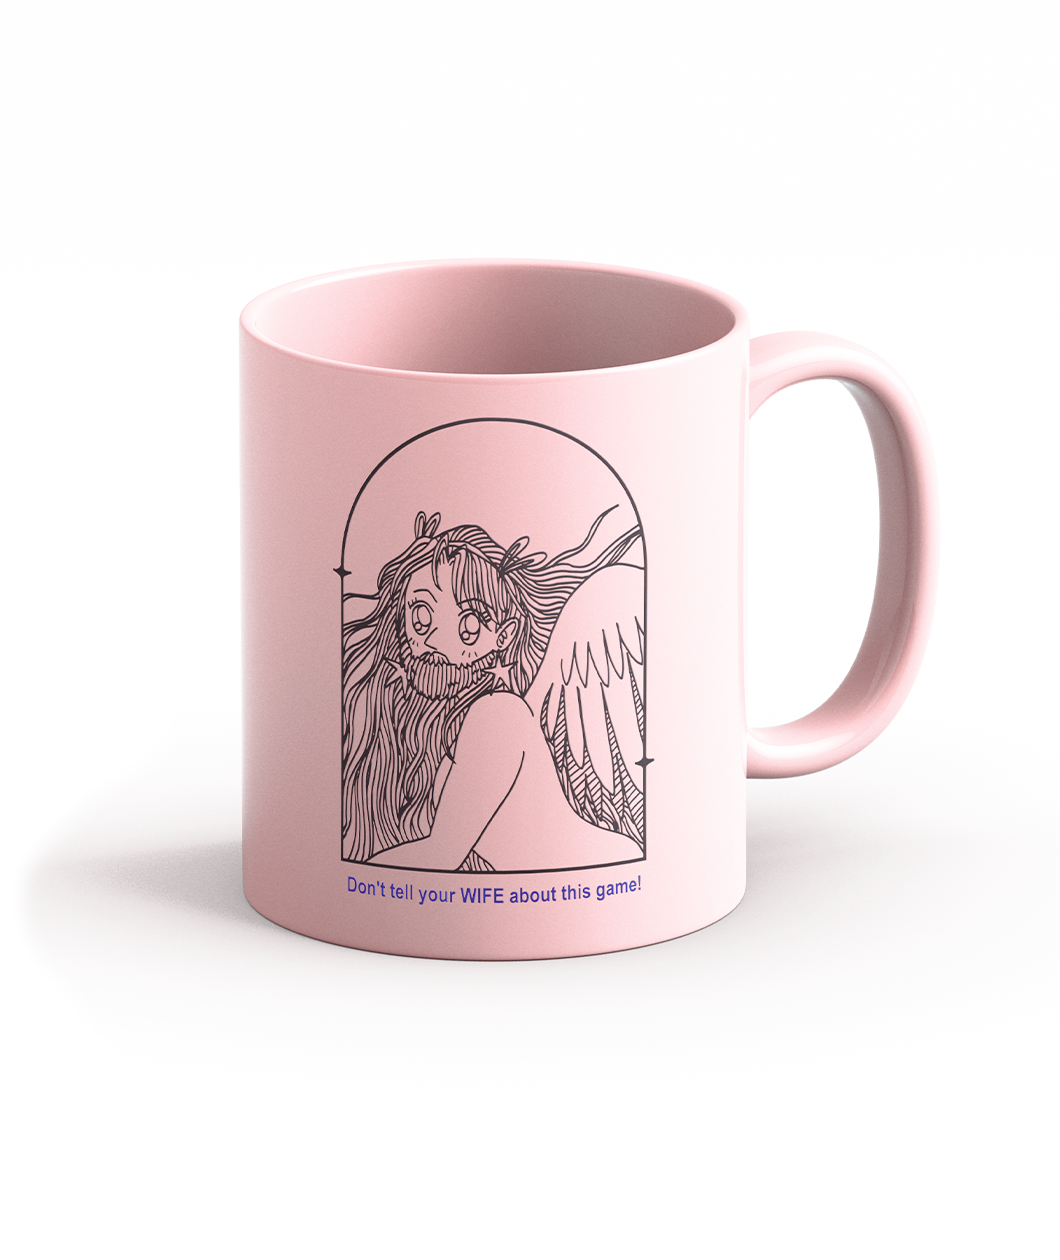 A light pink mug with an illustration of a long haired, bearded fairy creature. The text below the image reads 